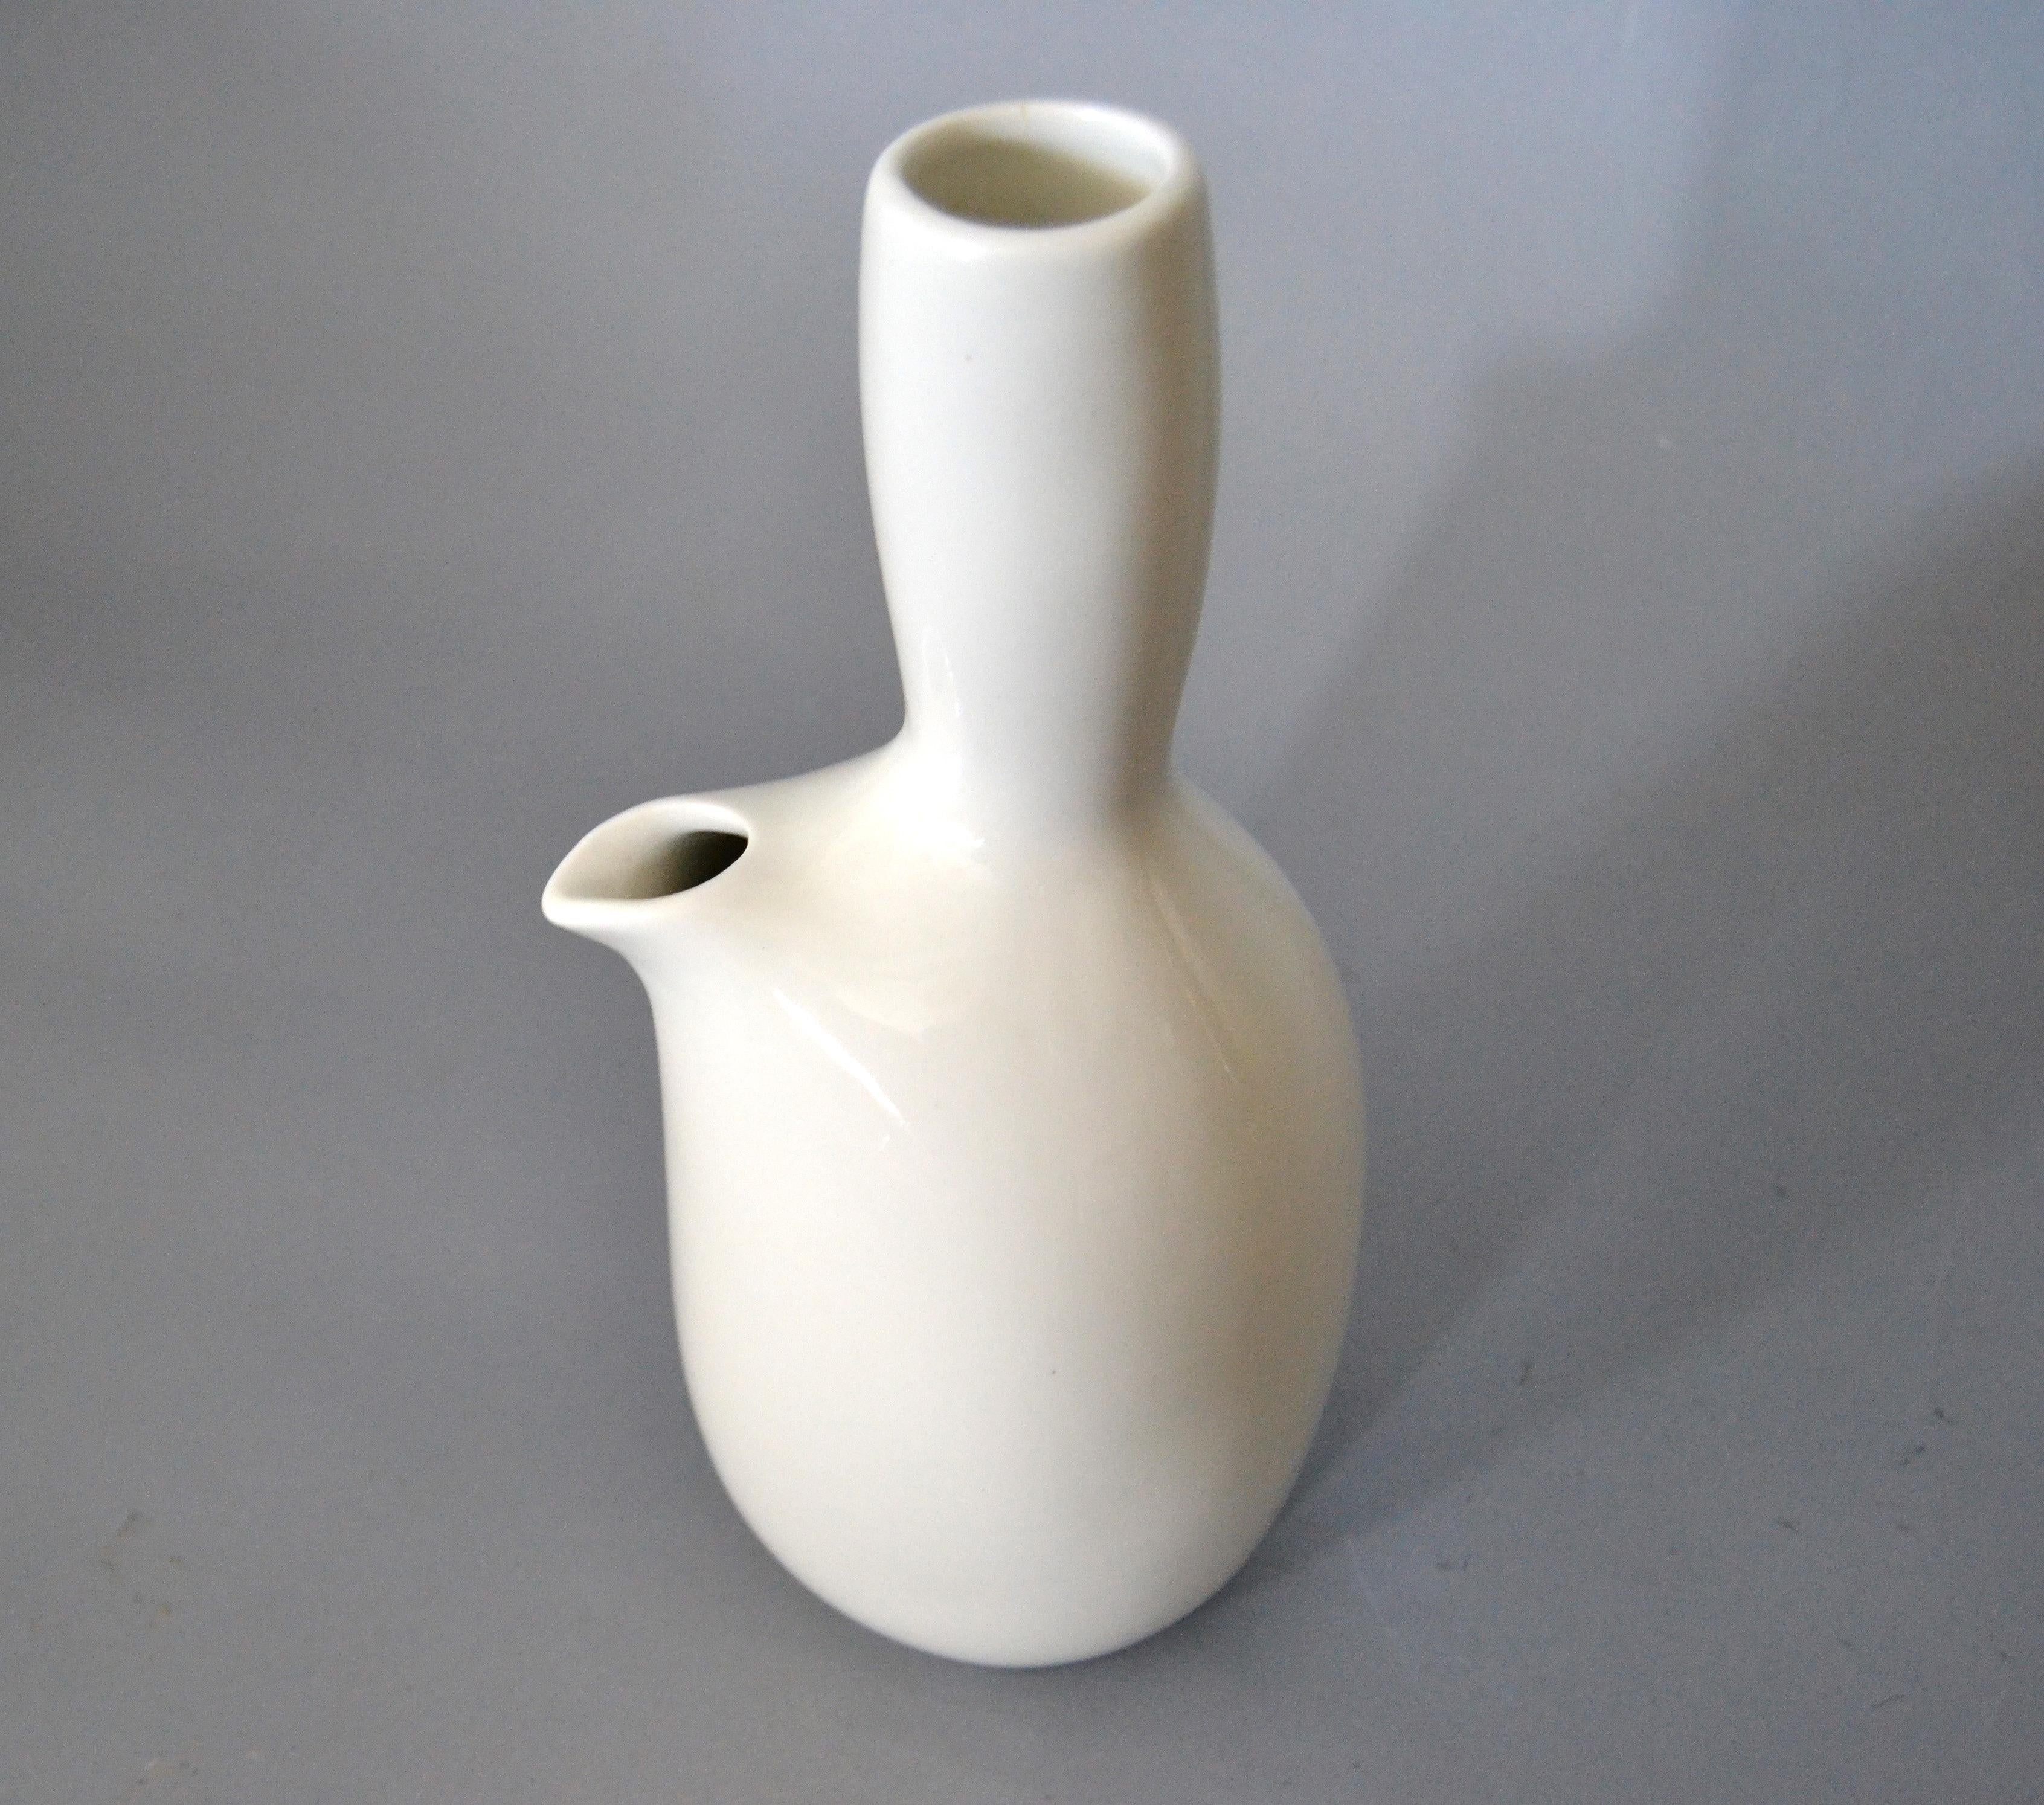 American Craftsman American Modern Iroquois White Porcelain Carafe Russel Wright for Bauer Pottery